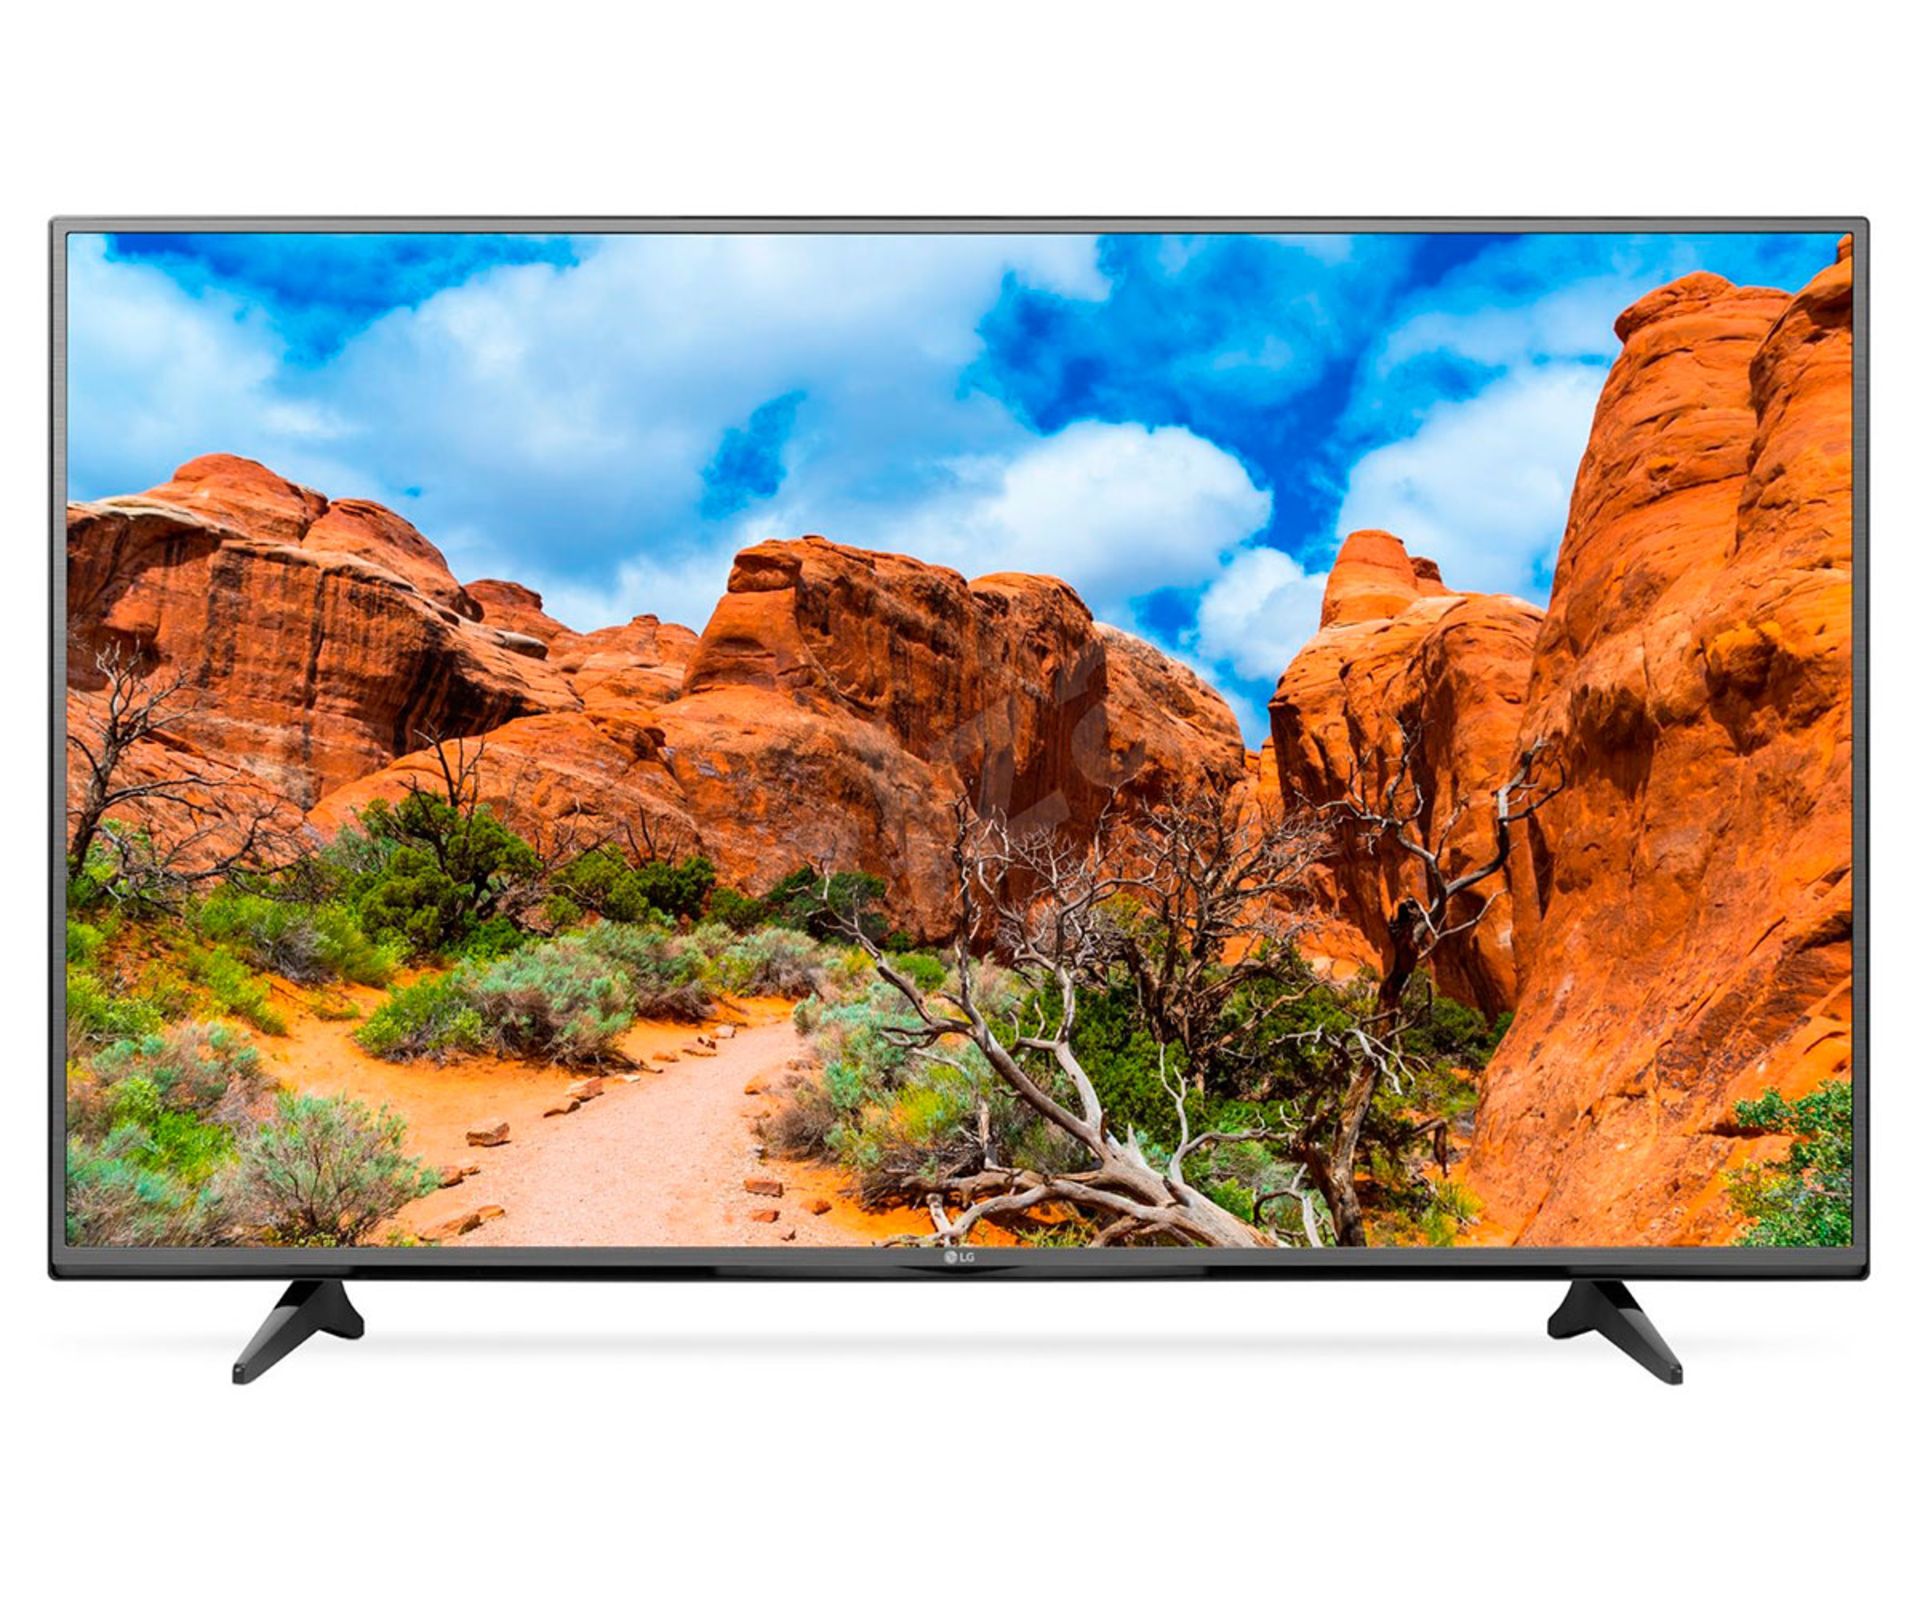 V Grade A LG 49" 4K ULTRA HD SMART LED TV WITH FREEVIEW HD & WEBOS 2.0 49UF6407